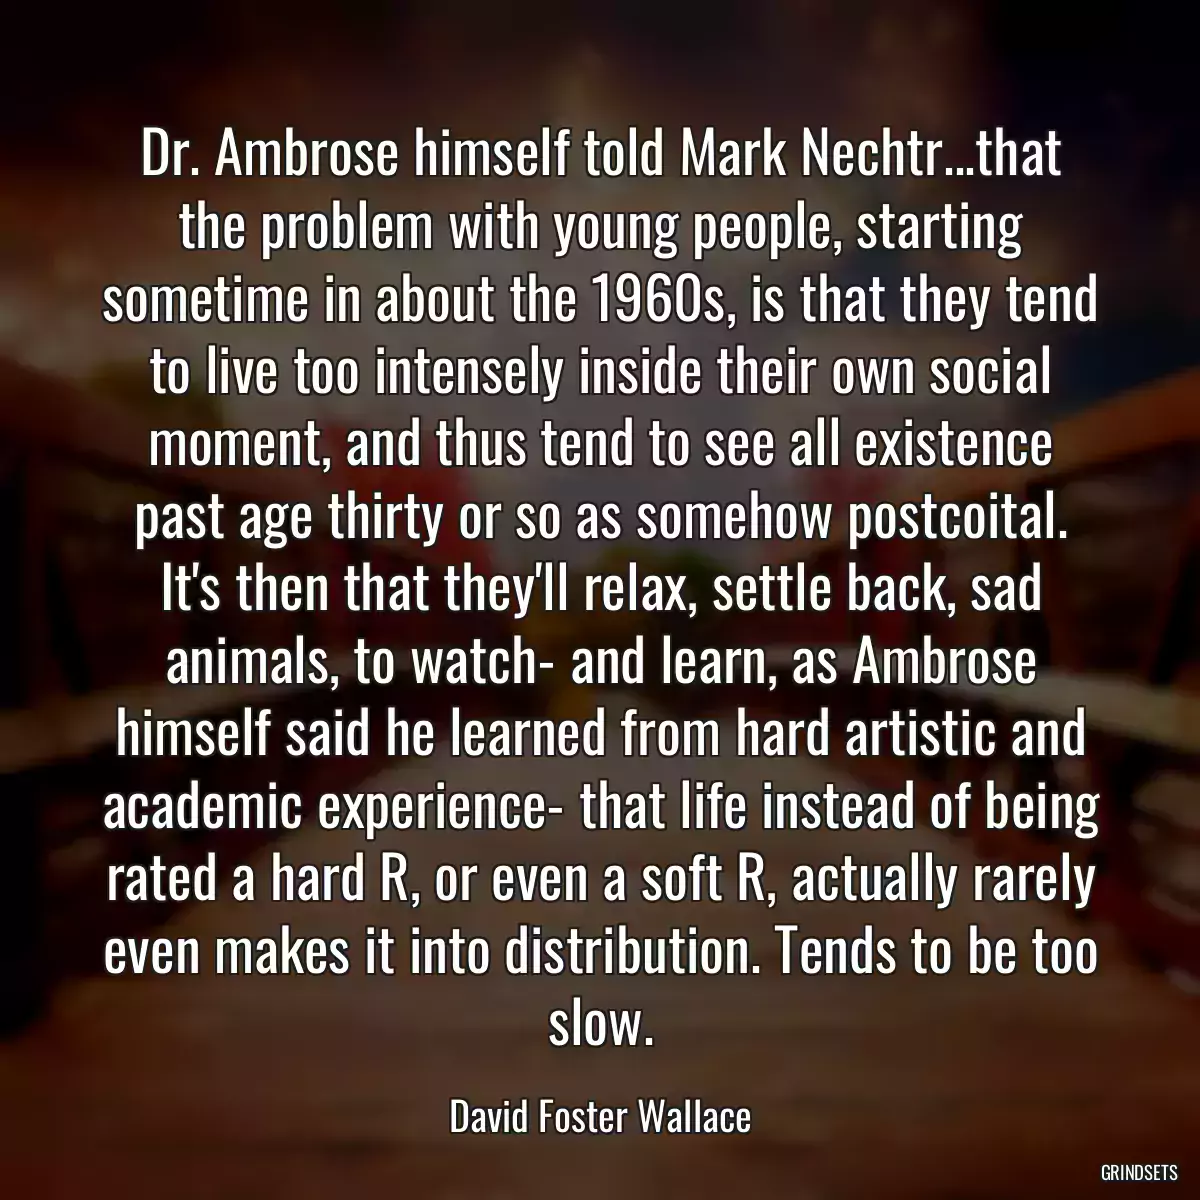 Dr. Ambrose himself told Mark Nechtr...that the problem with young people, starting sometime in about the 1960s, is that they tend to live too intensely inside their own social moment, and thus tend to see all existence past age thirty or so as somehow postcoital. It\'s then that they\'ll relax, settle back, sad animals, to watch- and learn, as Ambrose himself said he learned from hard artistic and academic experience- that life instead of being rated a hard R, or even a soft R, actually rarely even makes it into distribution. Tends to be too slow.